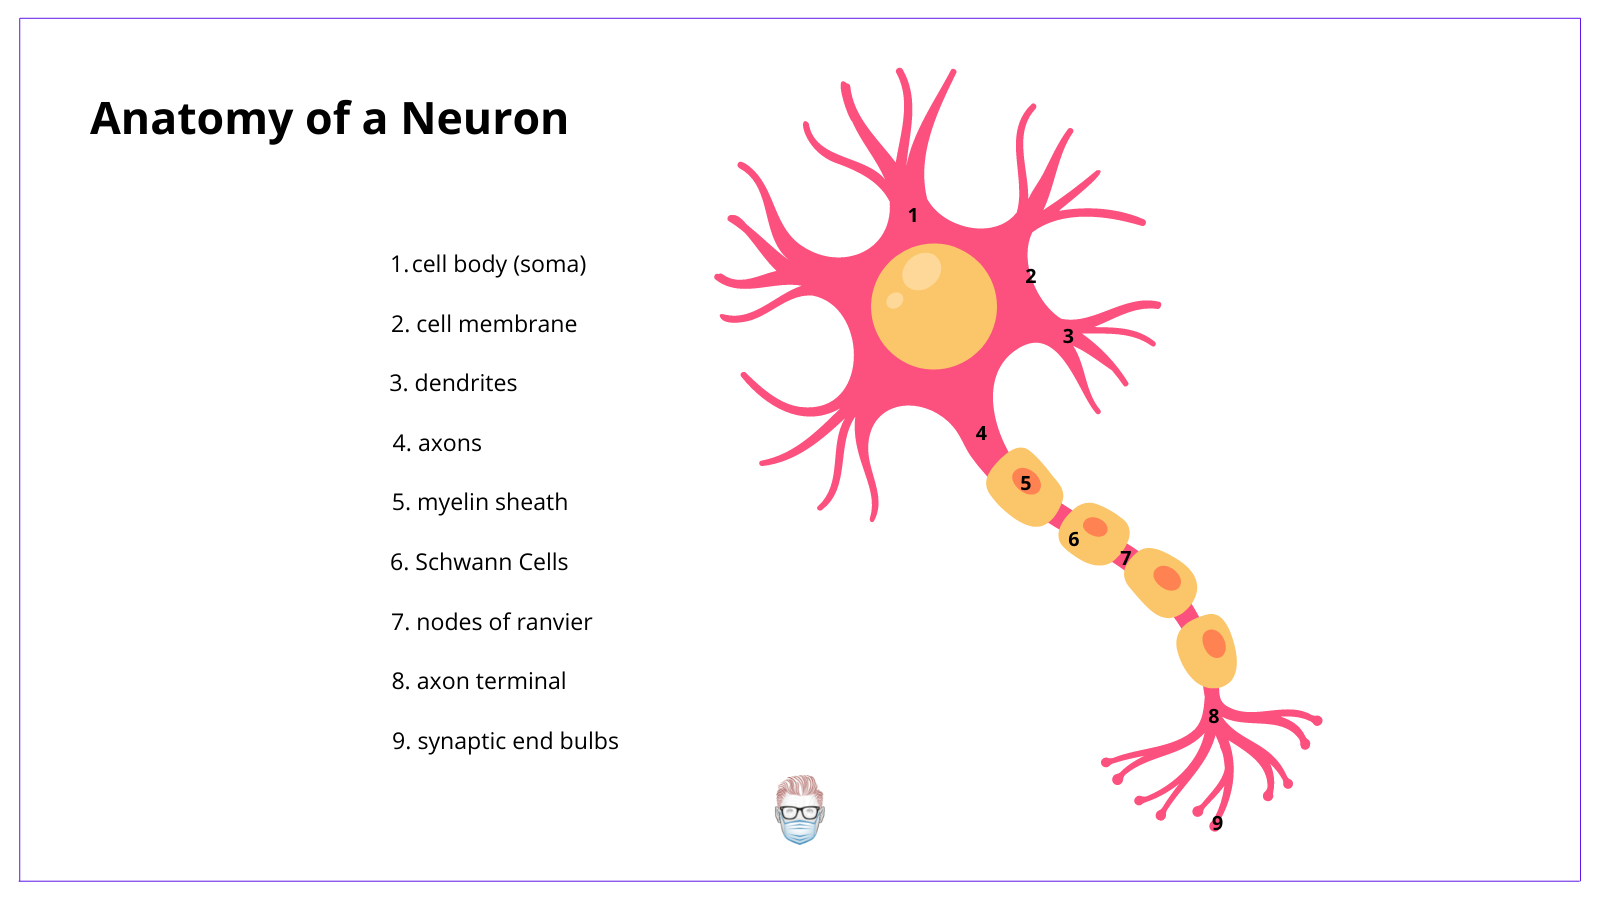 The neuron or nerve cell anatomy is composed of a cell body, dendrites, axons, myelin sheath, Schwann cells, Nodes of Ranvier and axon terminals. 